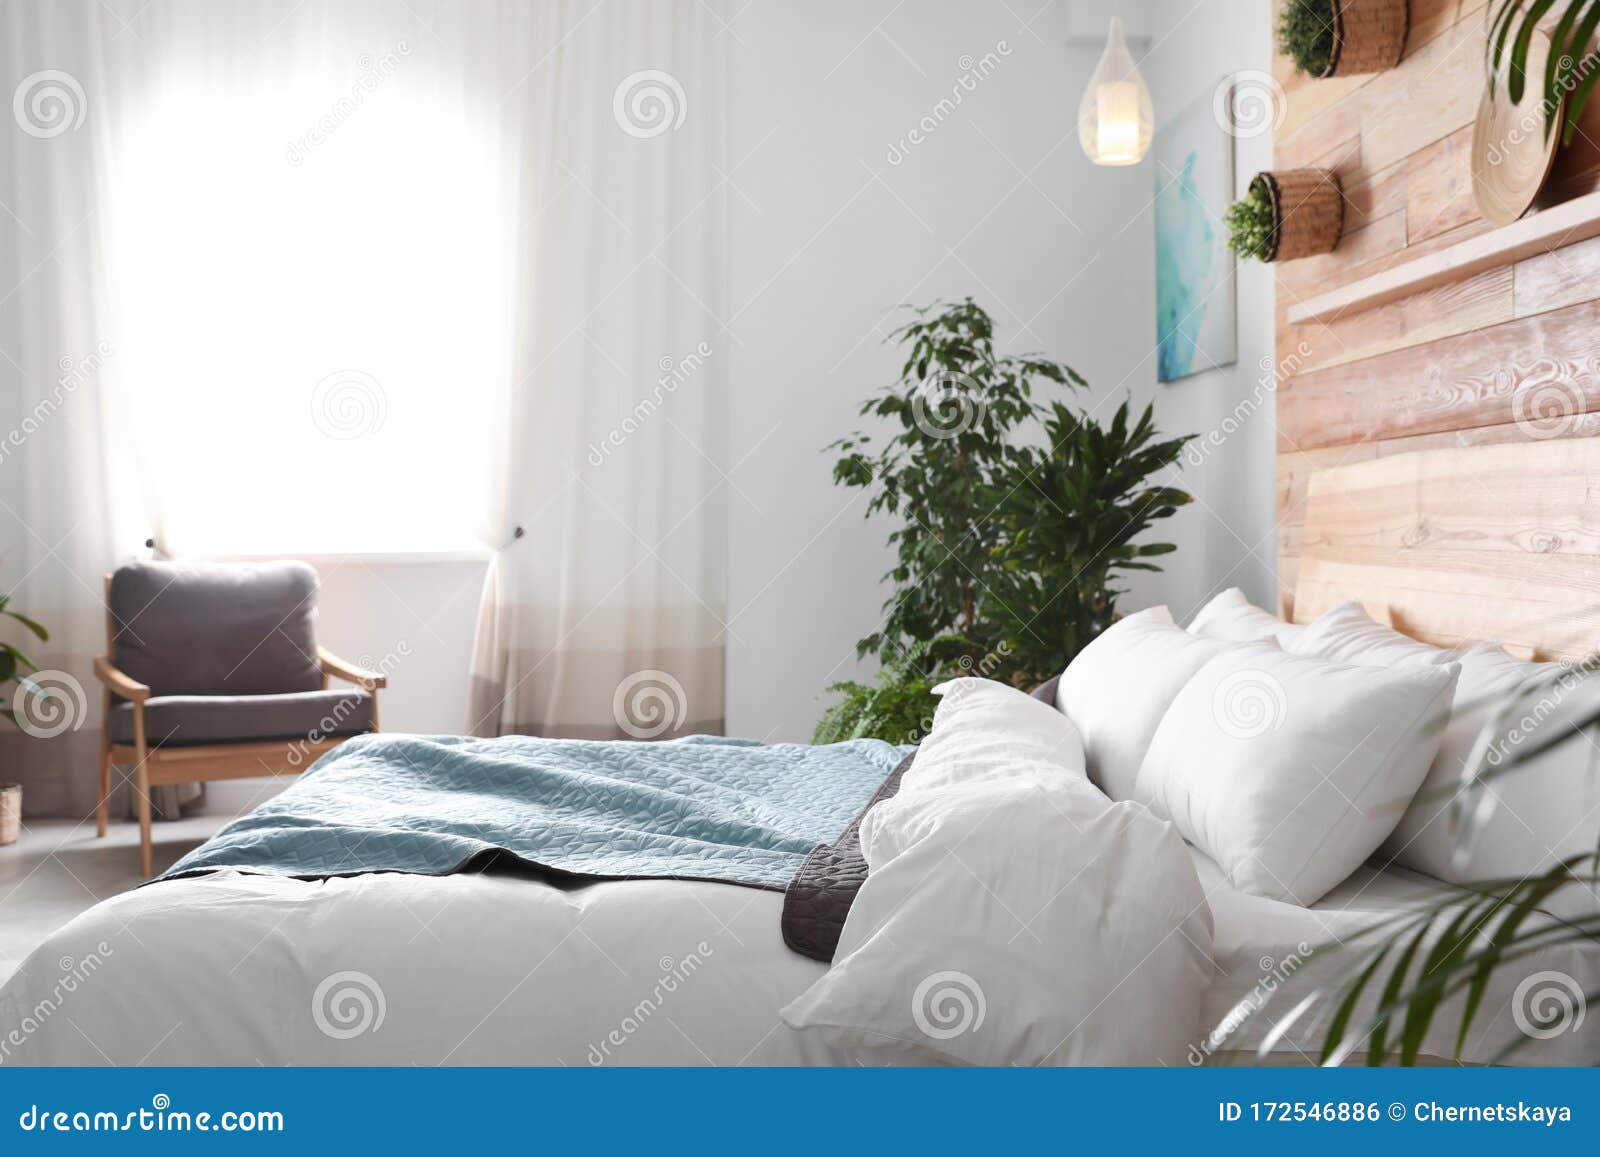 Cozy Bedroom Decorated with Plants. Home Design Ideas Stock Photo ...